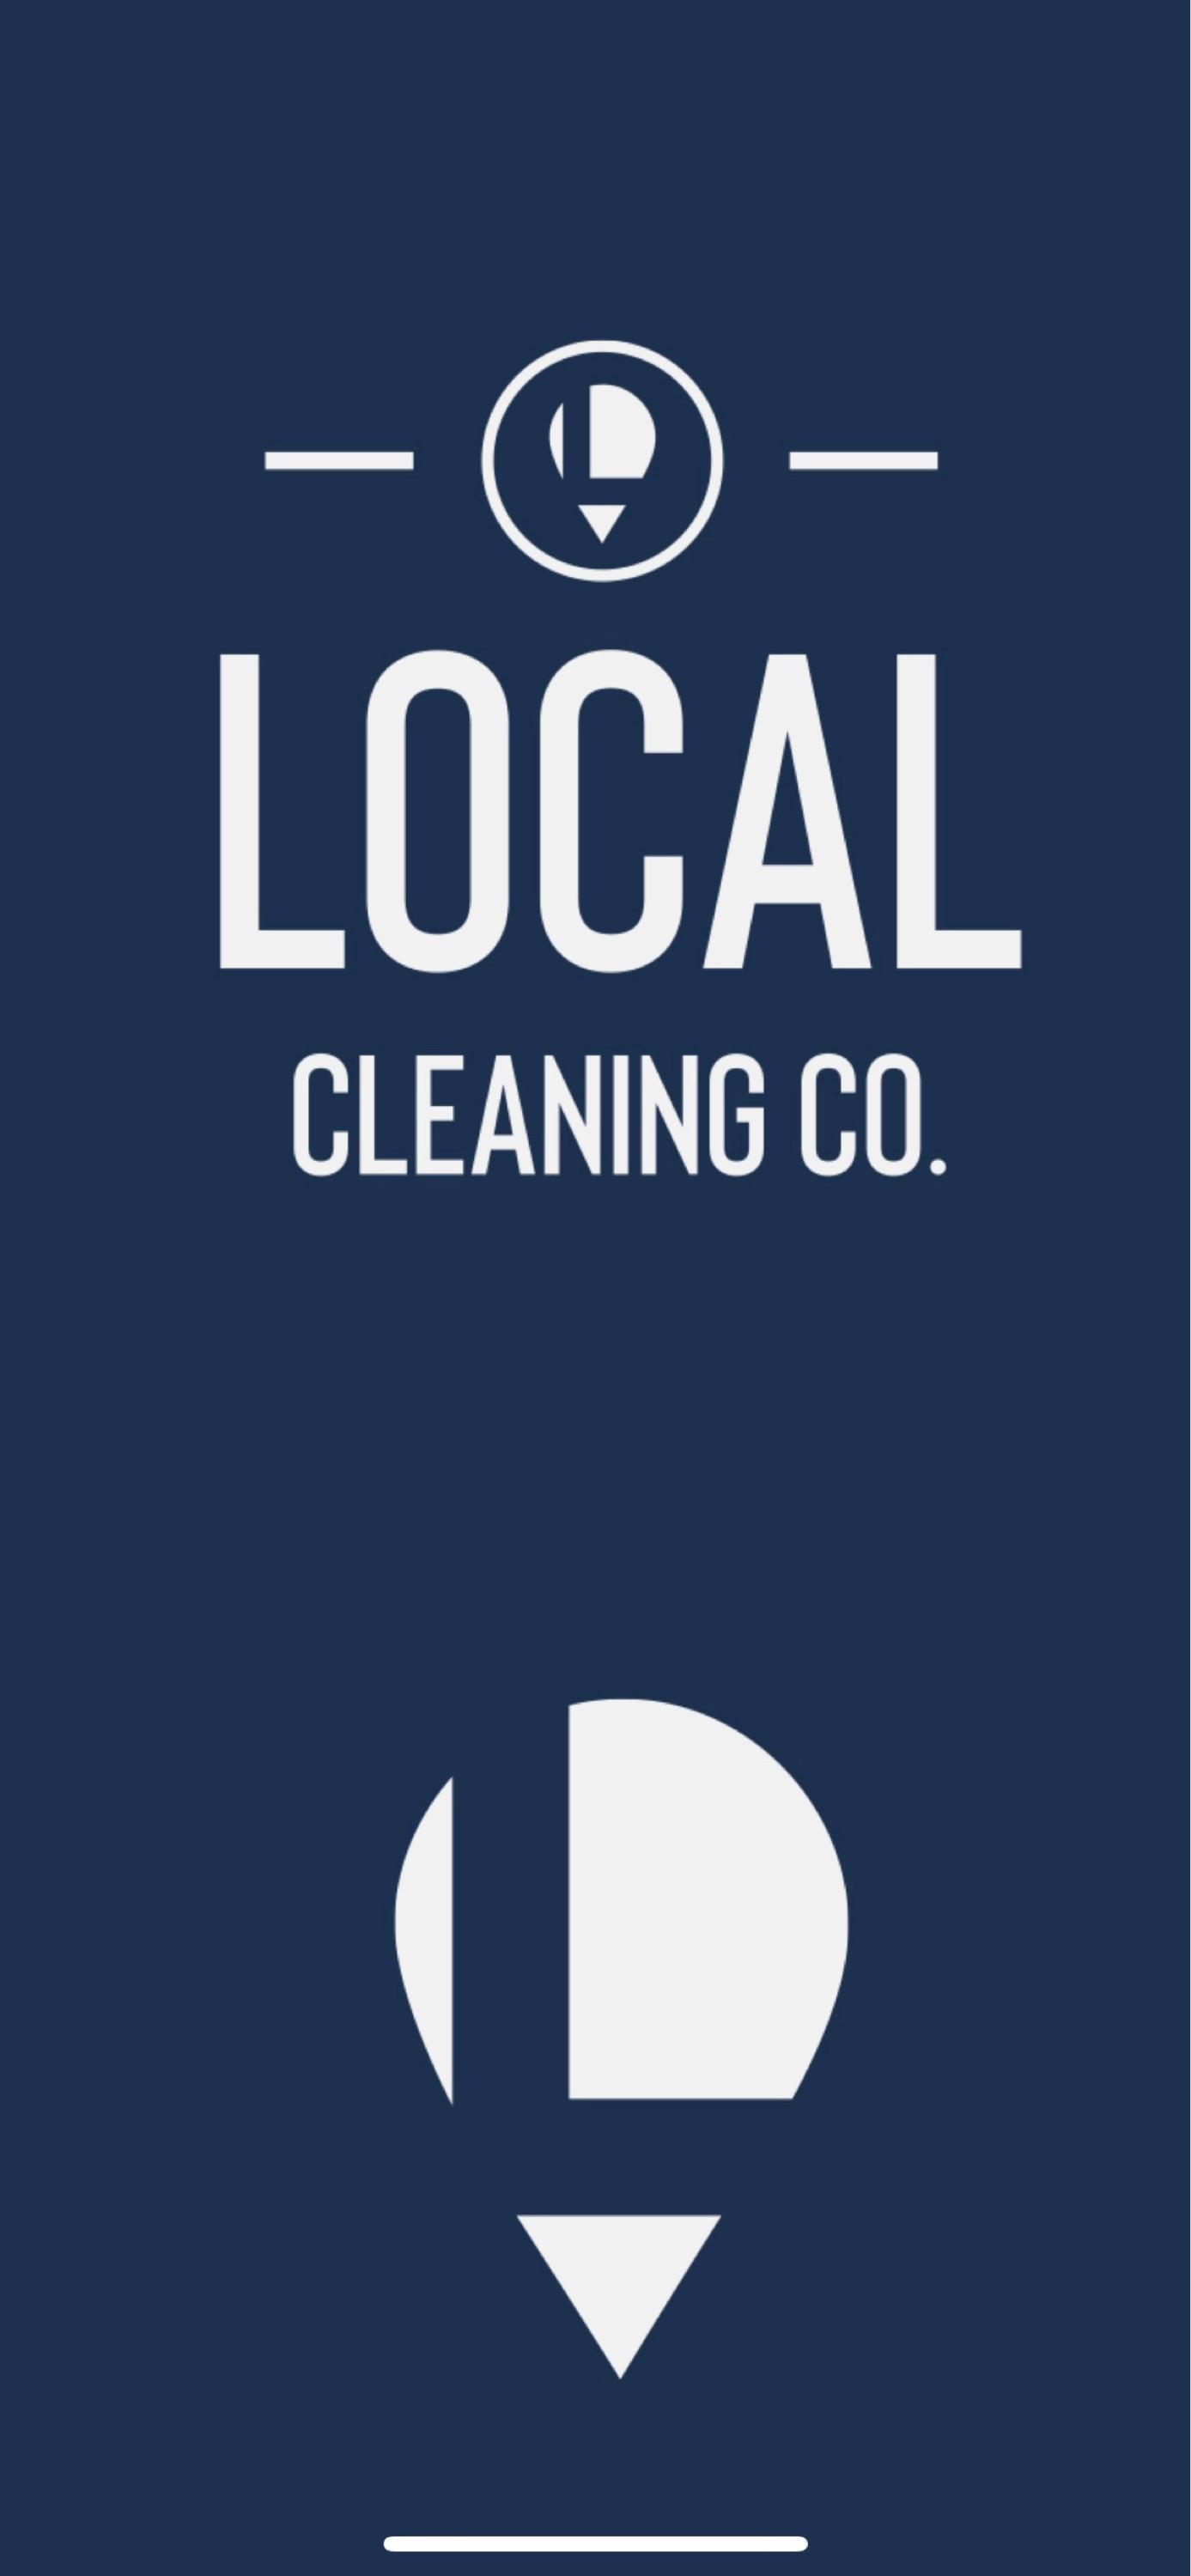 Local Cleaning Company Logo